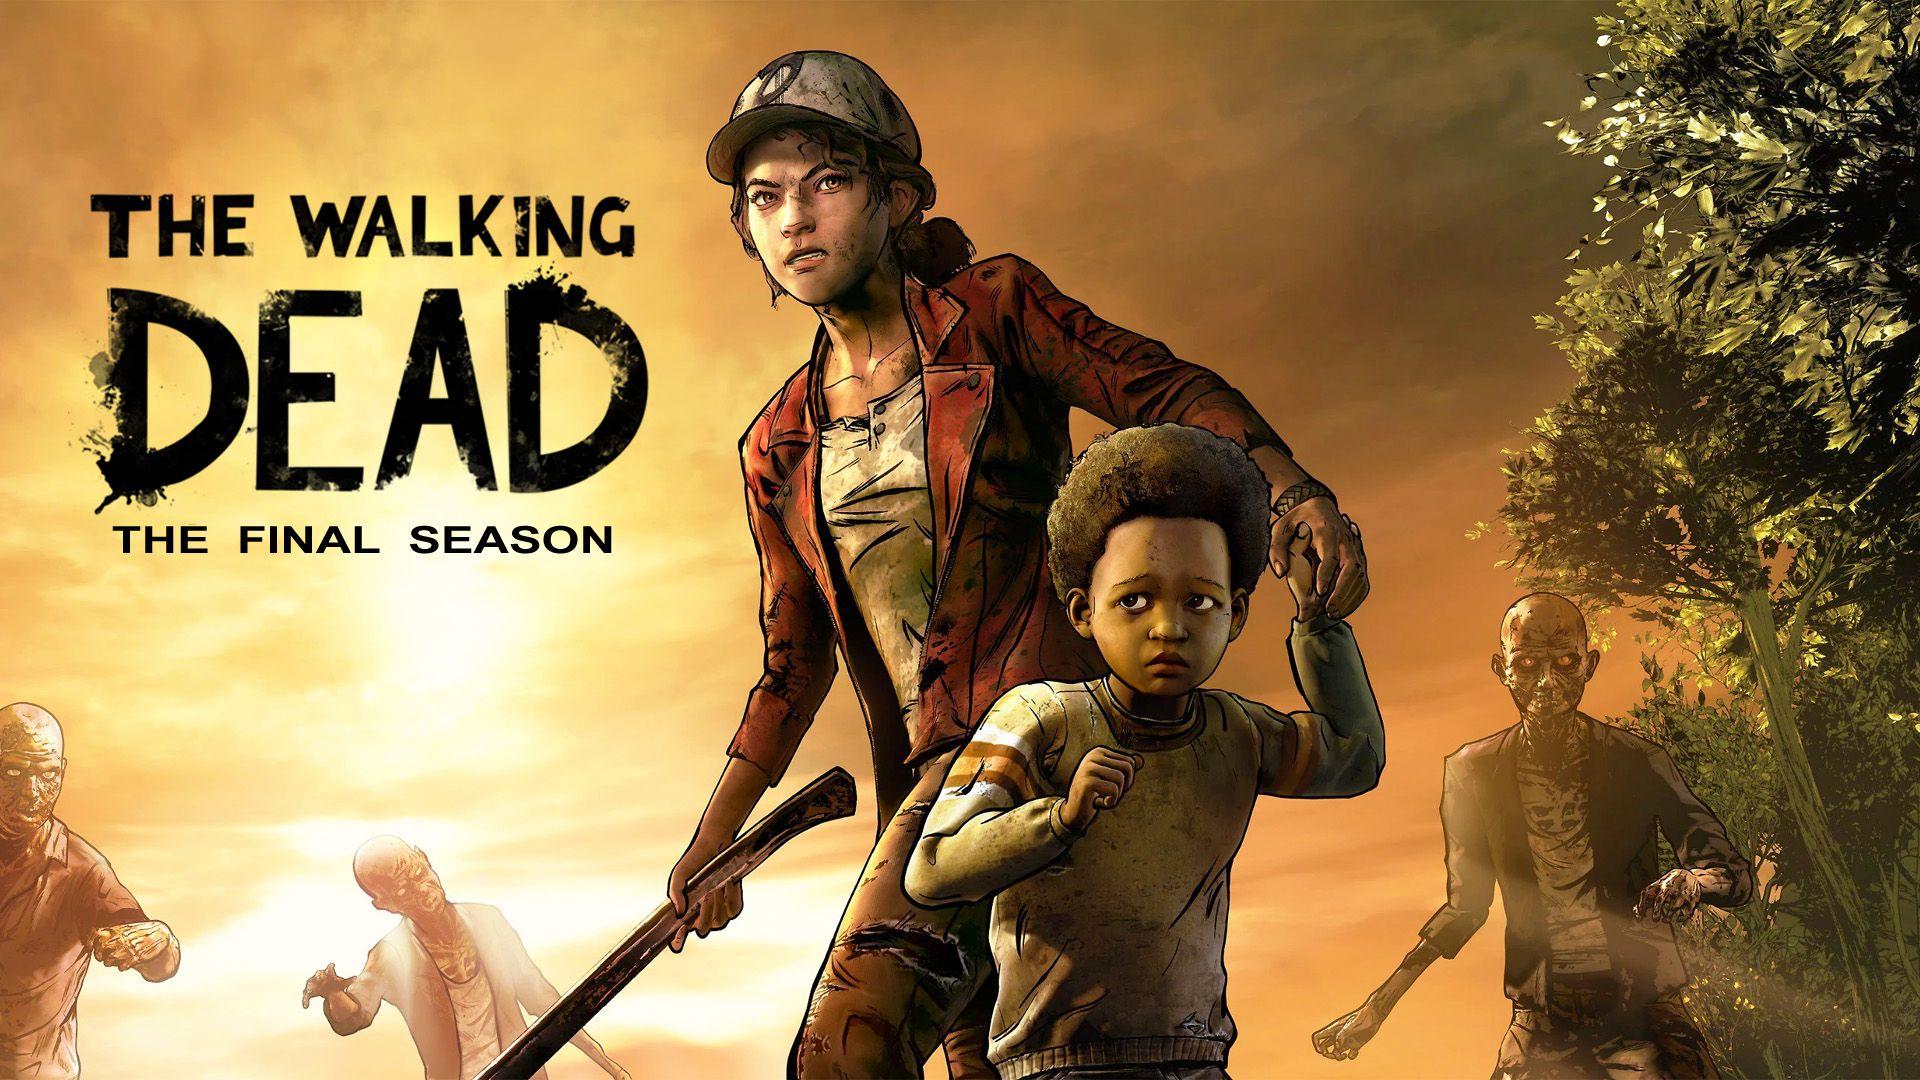 The Walking Dead: The Final Season to Get Episode Three in January 2019